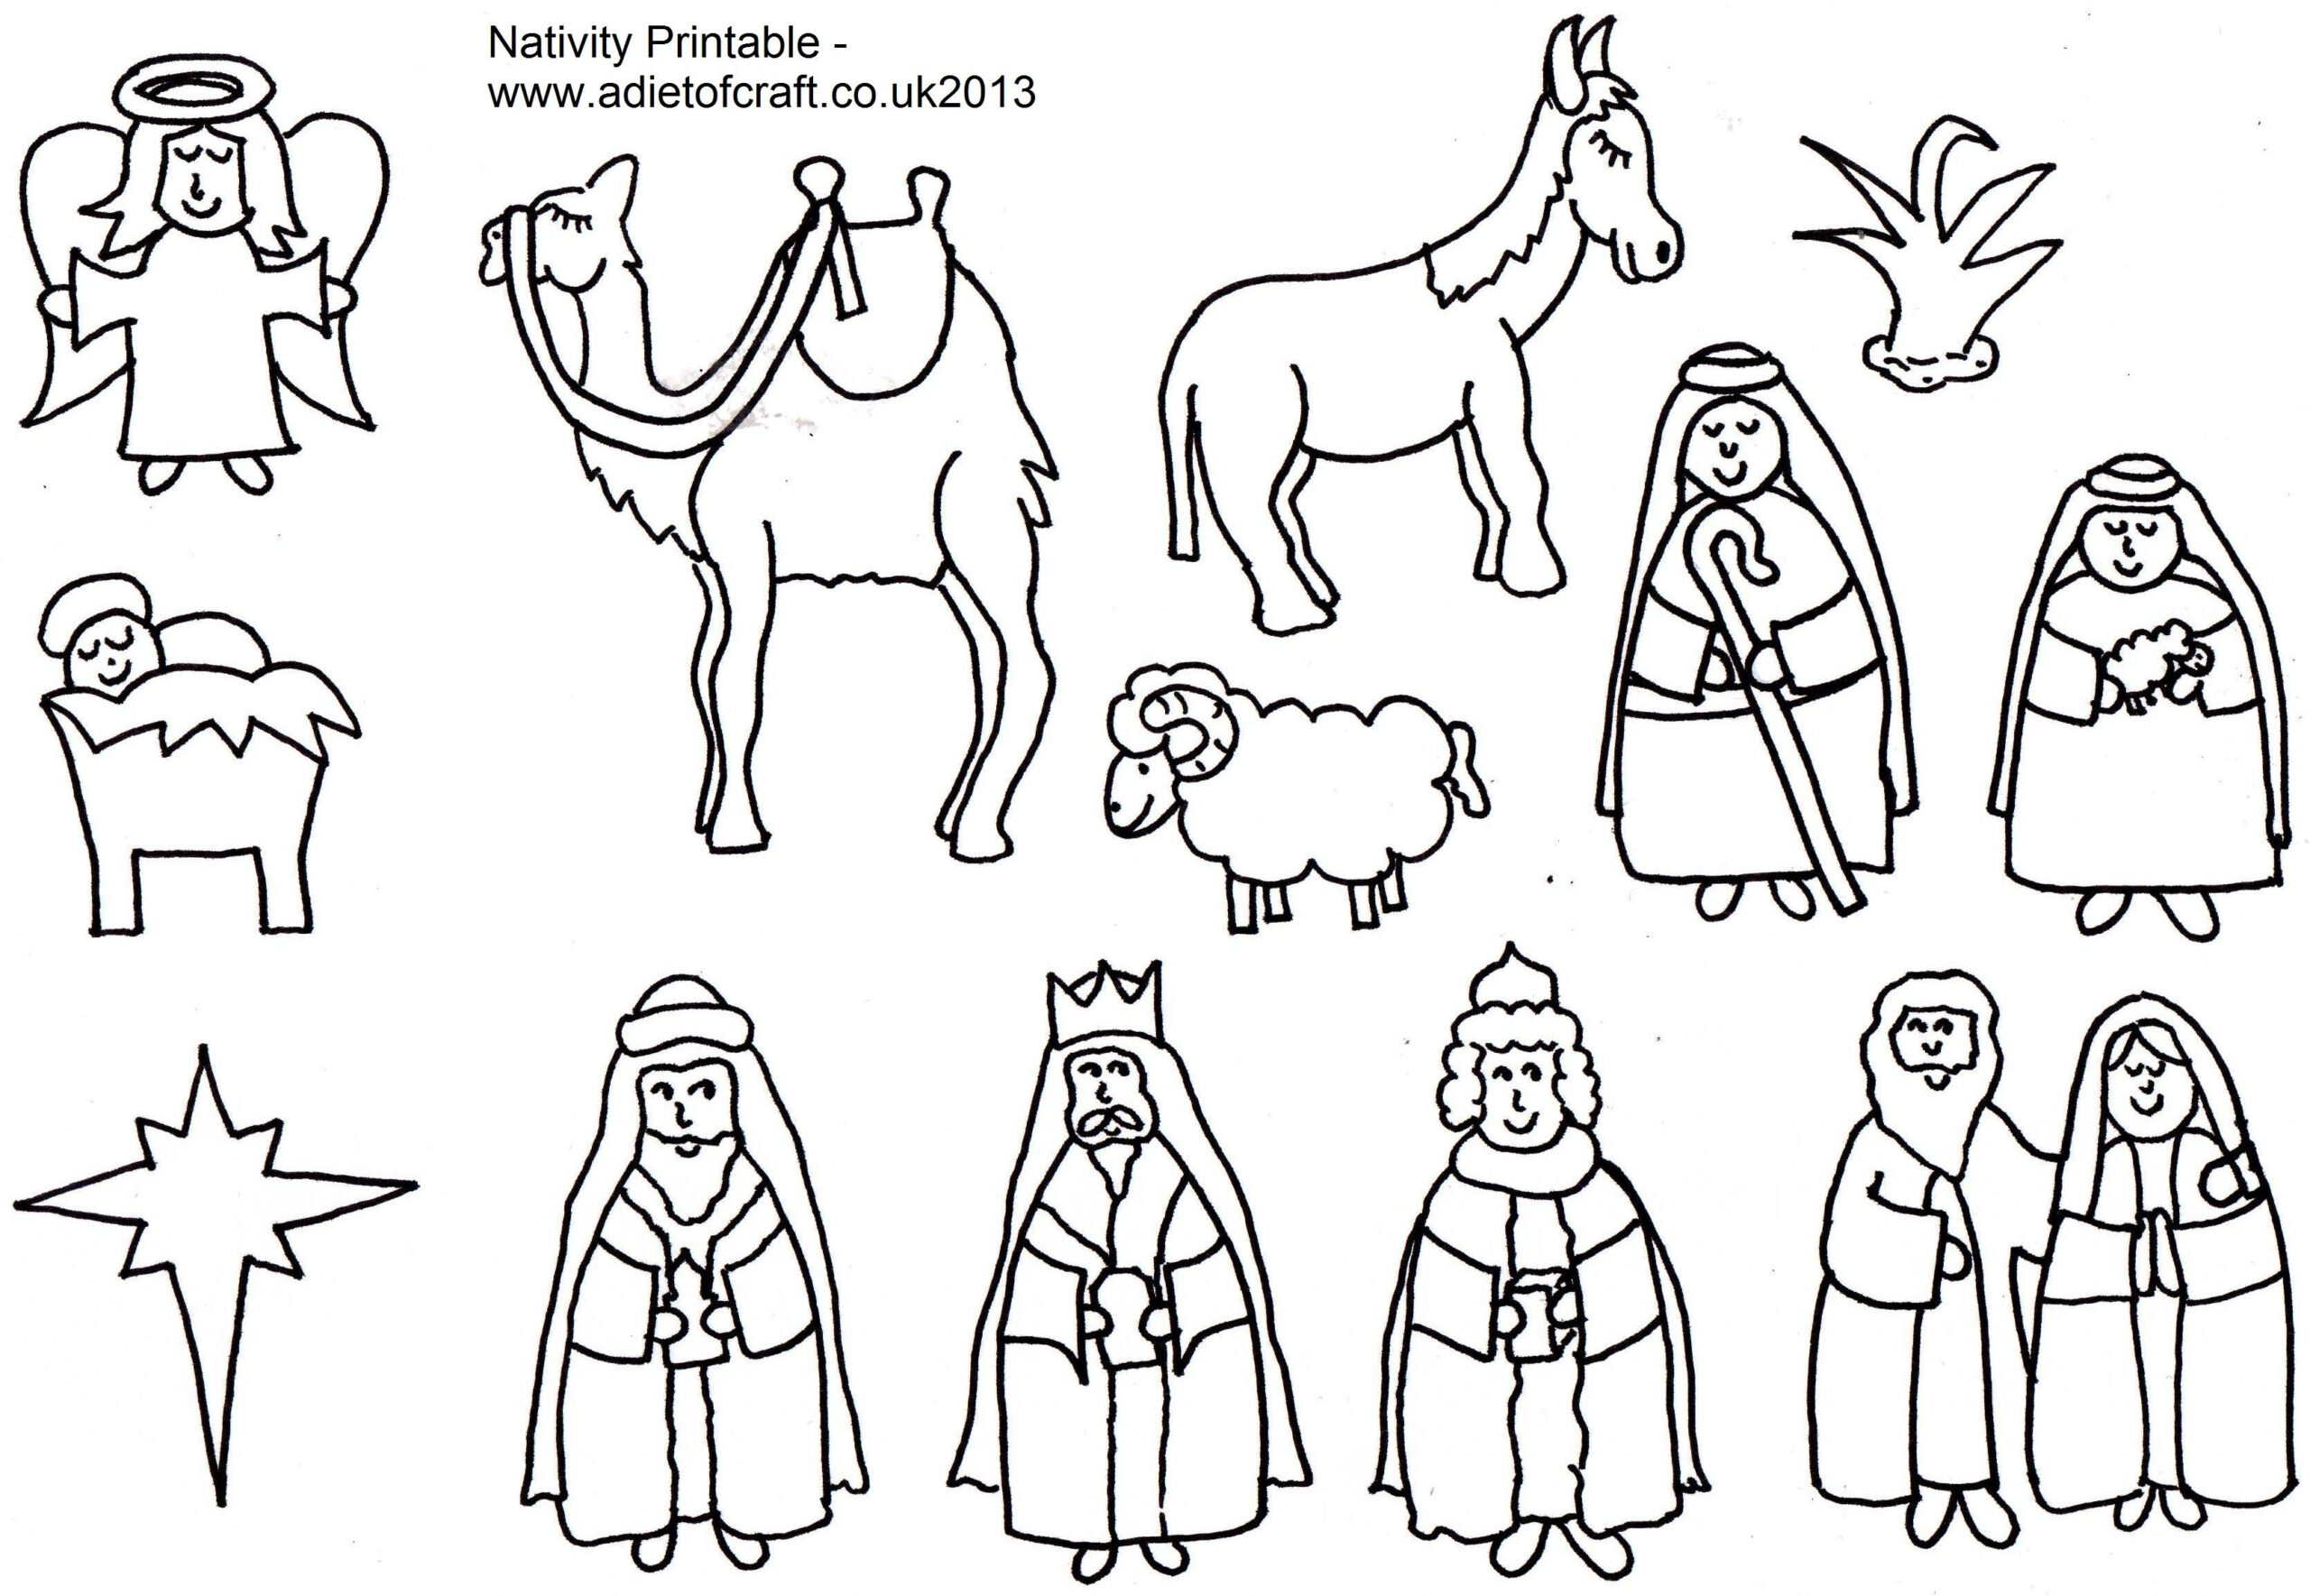 Nativity Scene Coloring Pages Printables Nativity Story Printable 